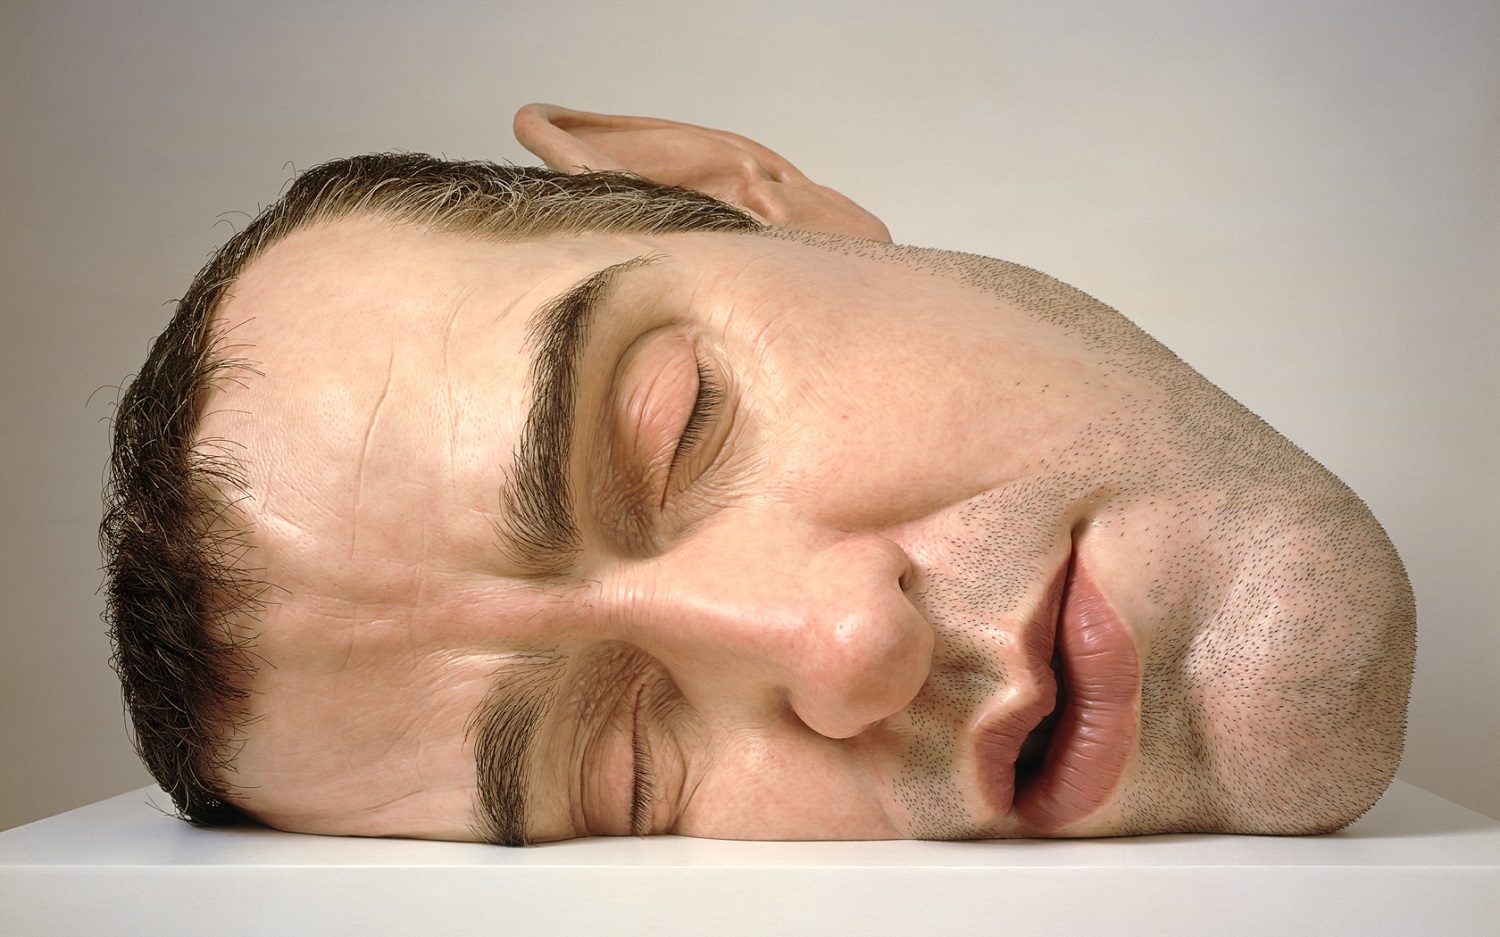 RON MUECK